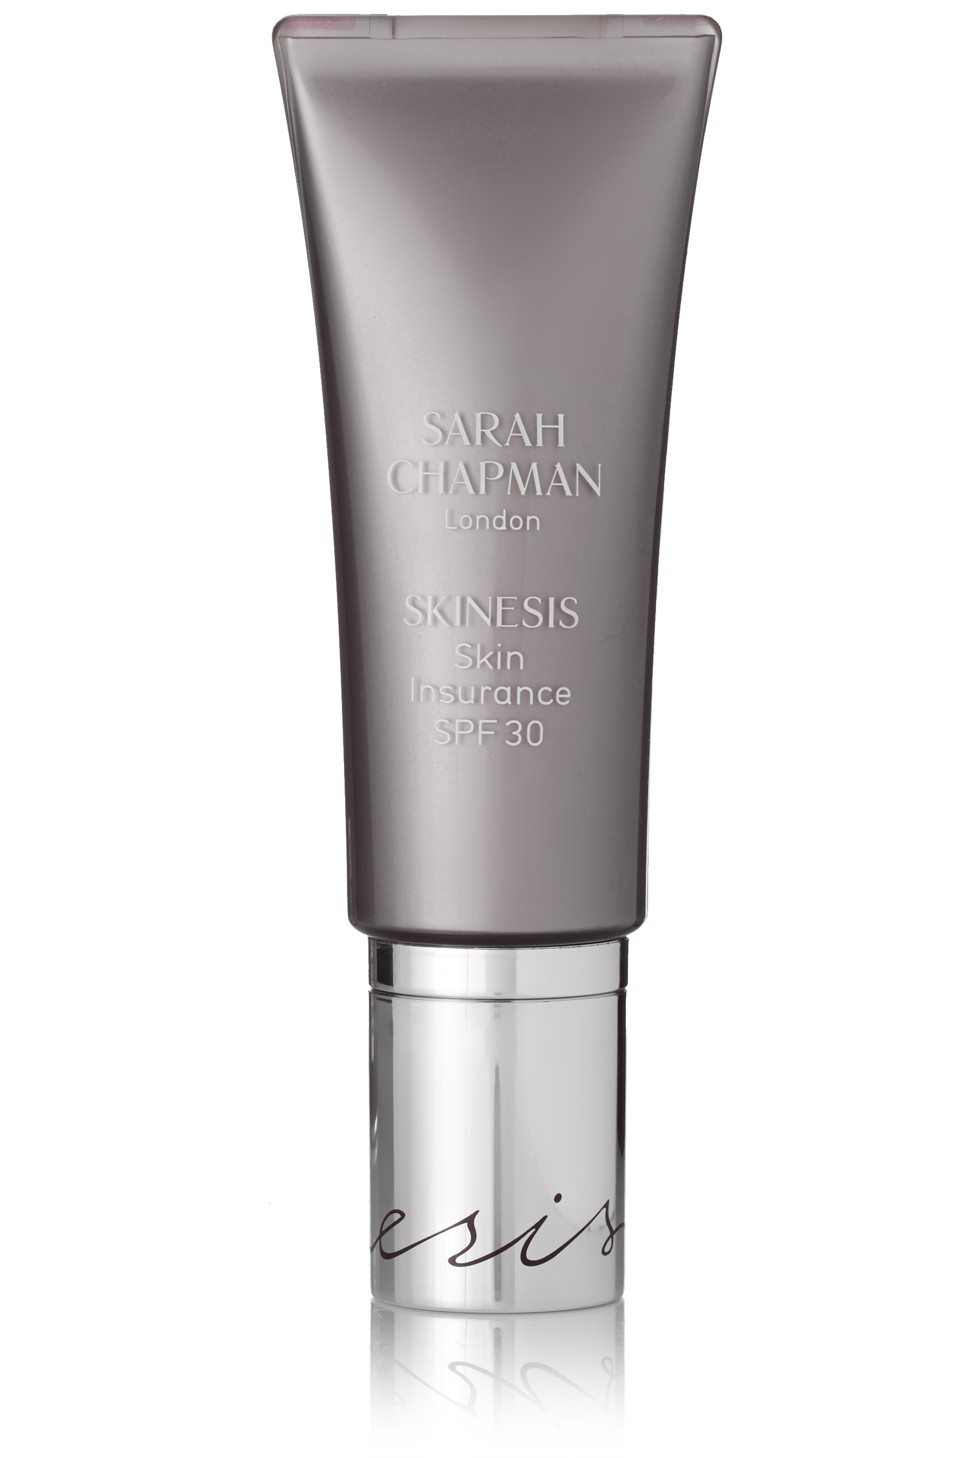 Sarah Chapman Skinesis Skin Insurance is light-activated to provide protection from infrared, thermal and UV damage.